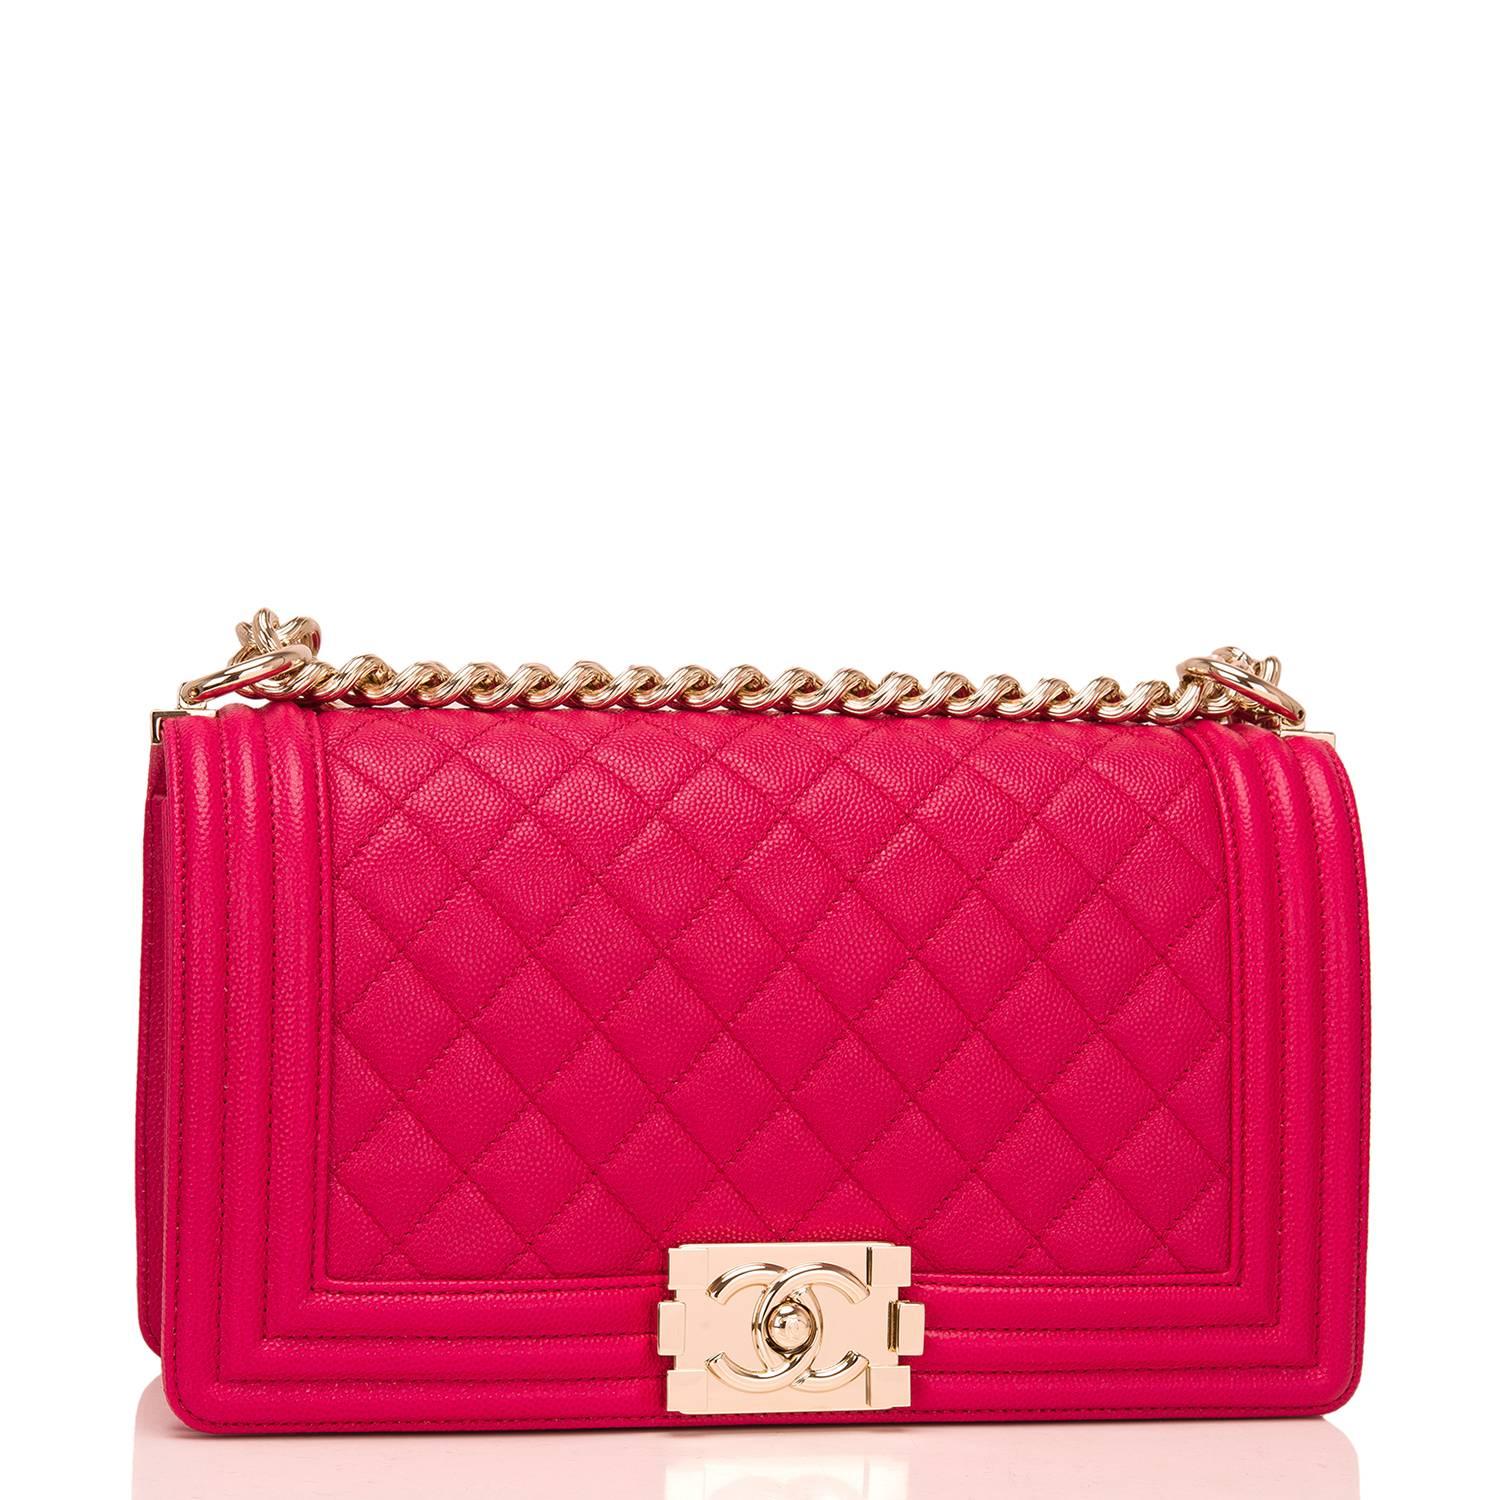 Chanel Old Medium Boy bag of fuchsia quilted caviar leather and light gold tone hardware.

This Chanel bag is in the classic Boy style with a full front flap with the Boy signature CC push lock closure, smooth leather trim and light gold tone chain